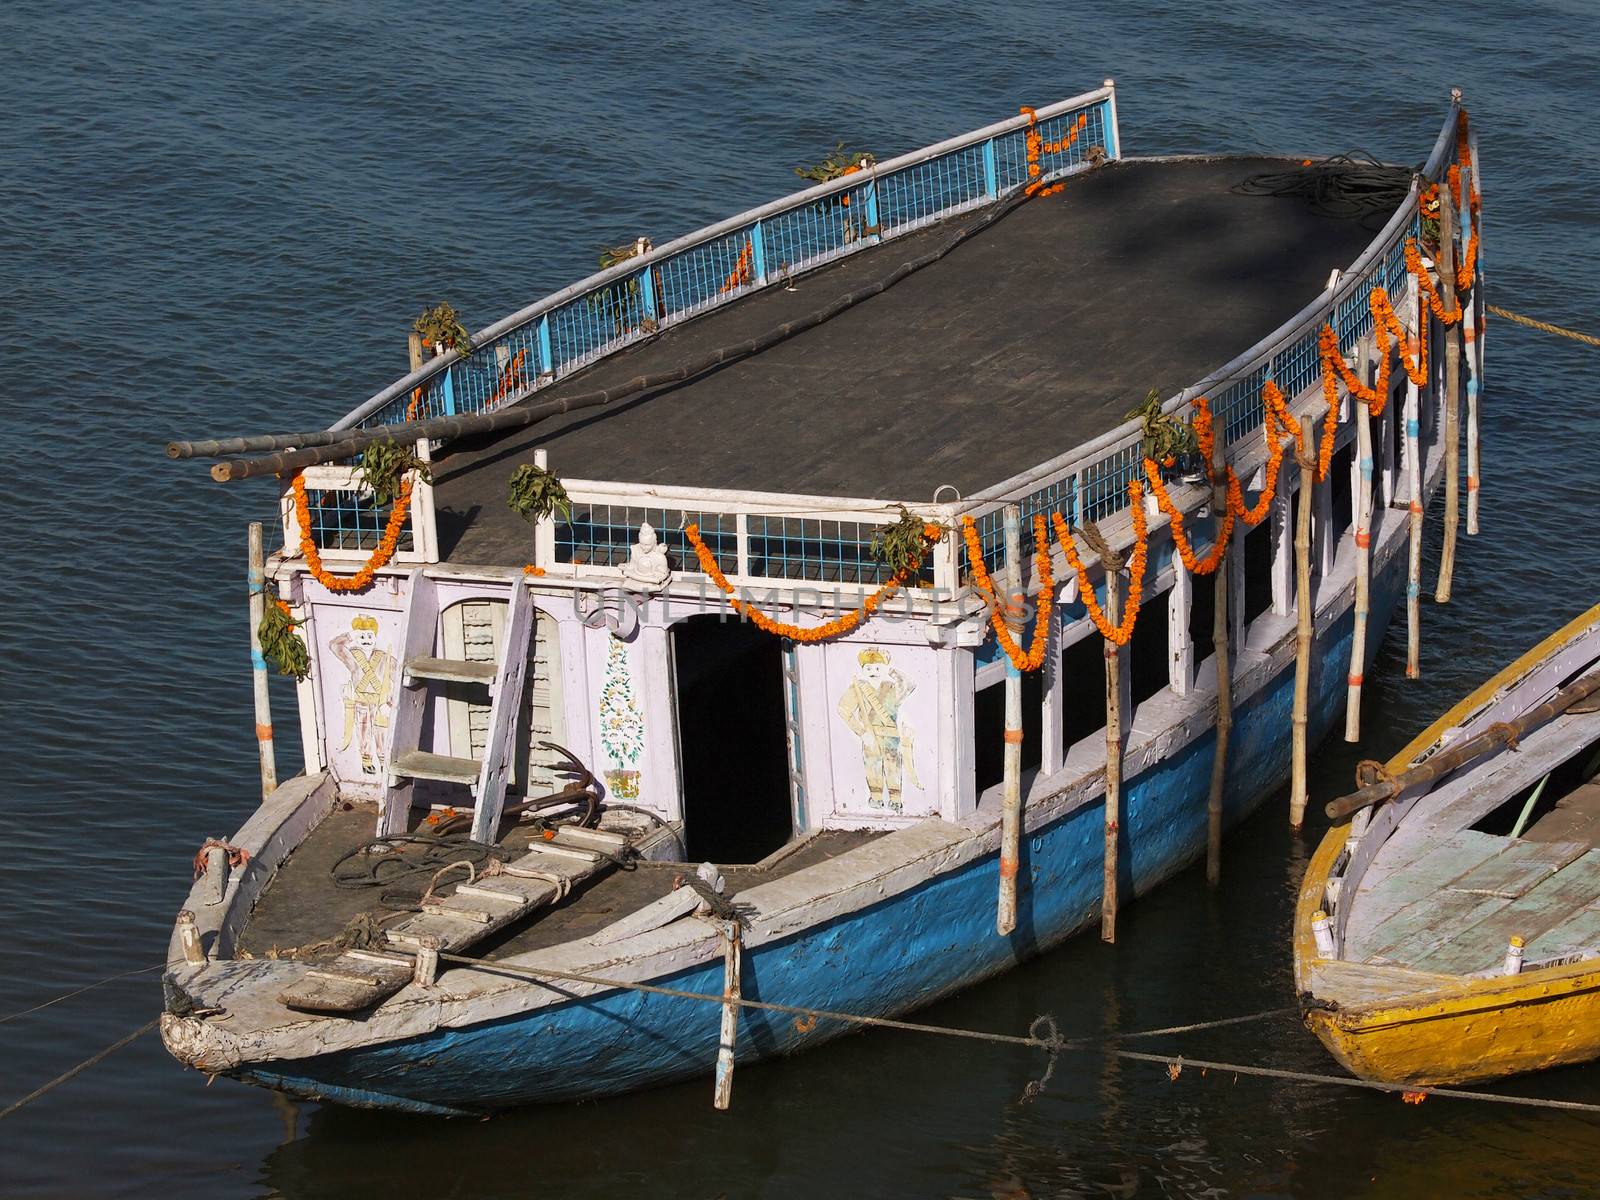 boats in Ganges holy river in Varanasi city, India  